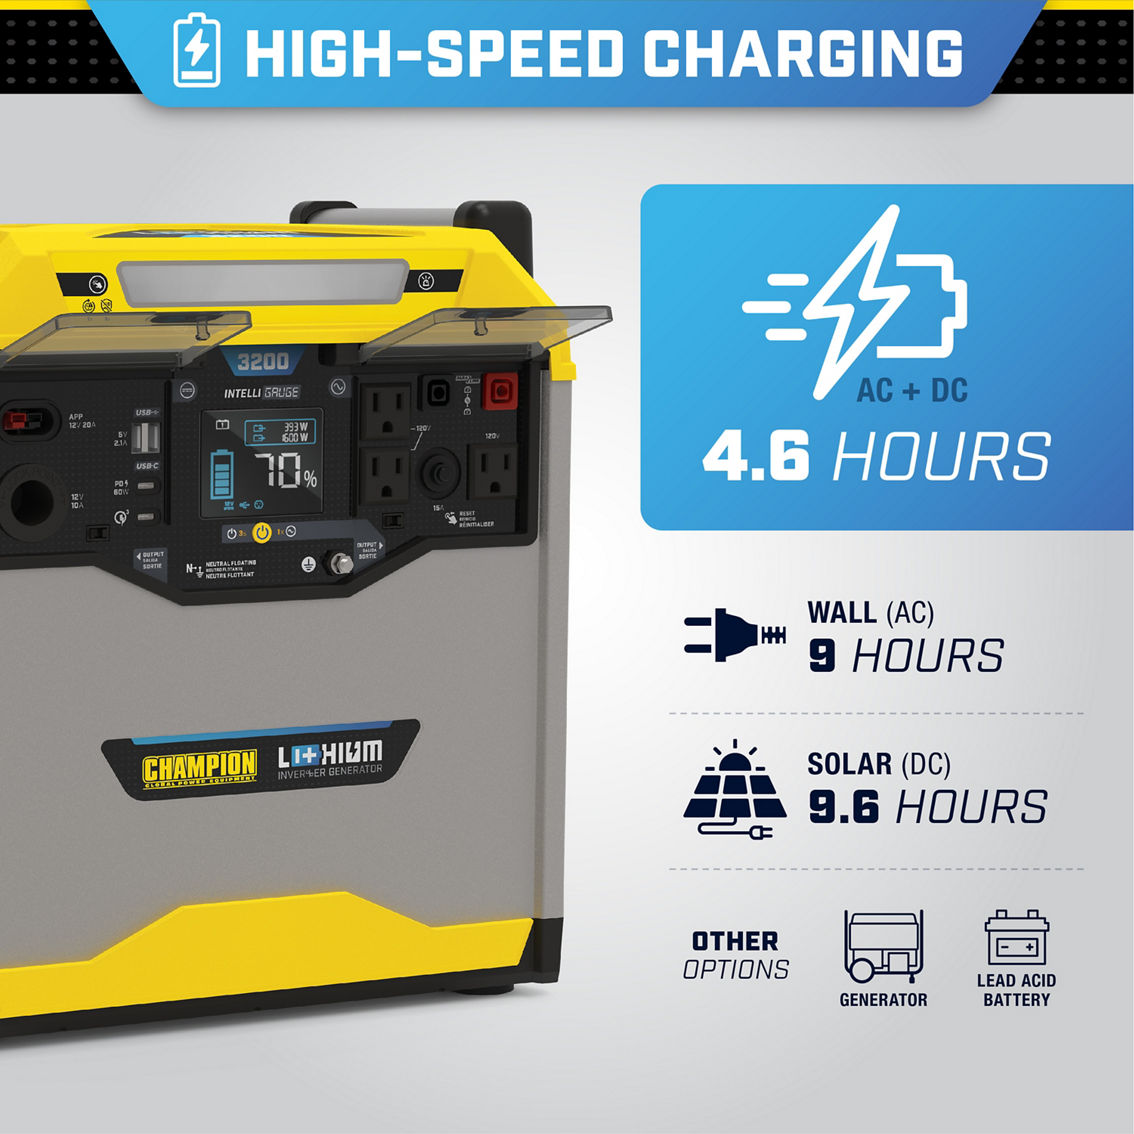 Champion 3276-Wh Lithium-Ion Solar Generator Portable Power Station Backup Battery - Image 5 of 8